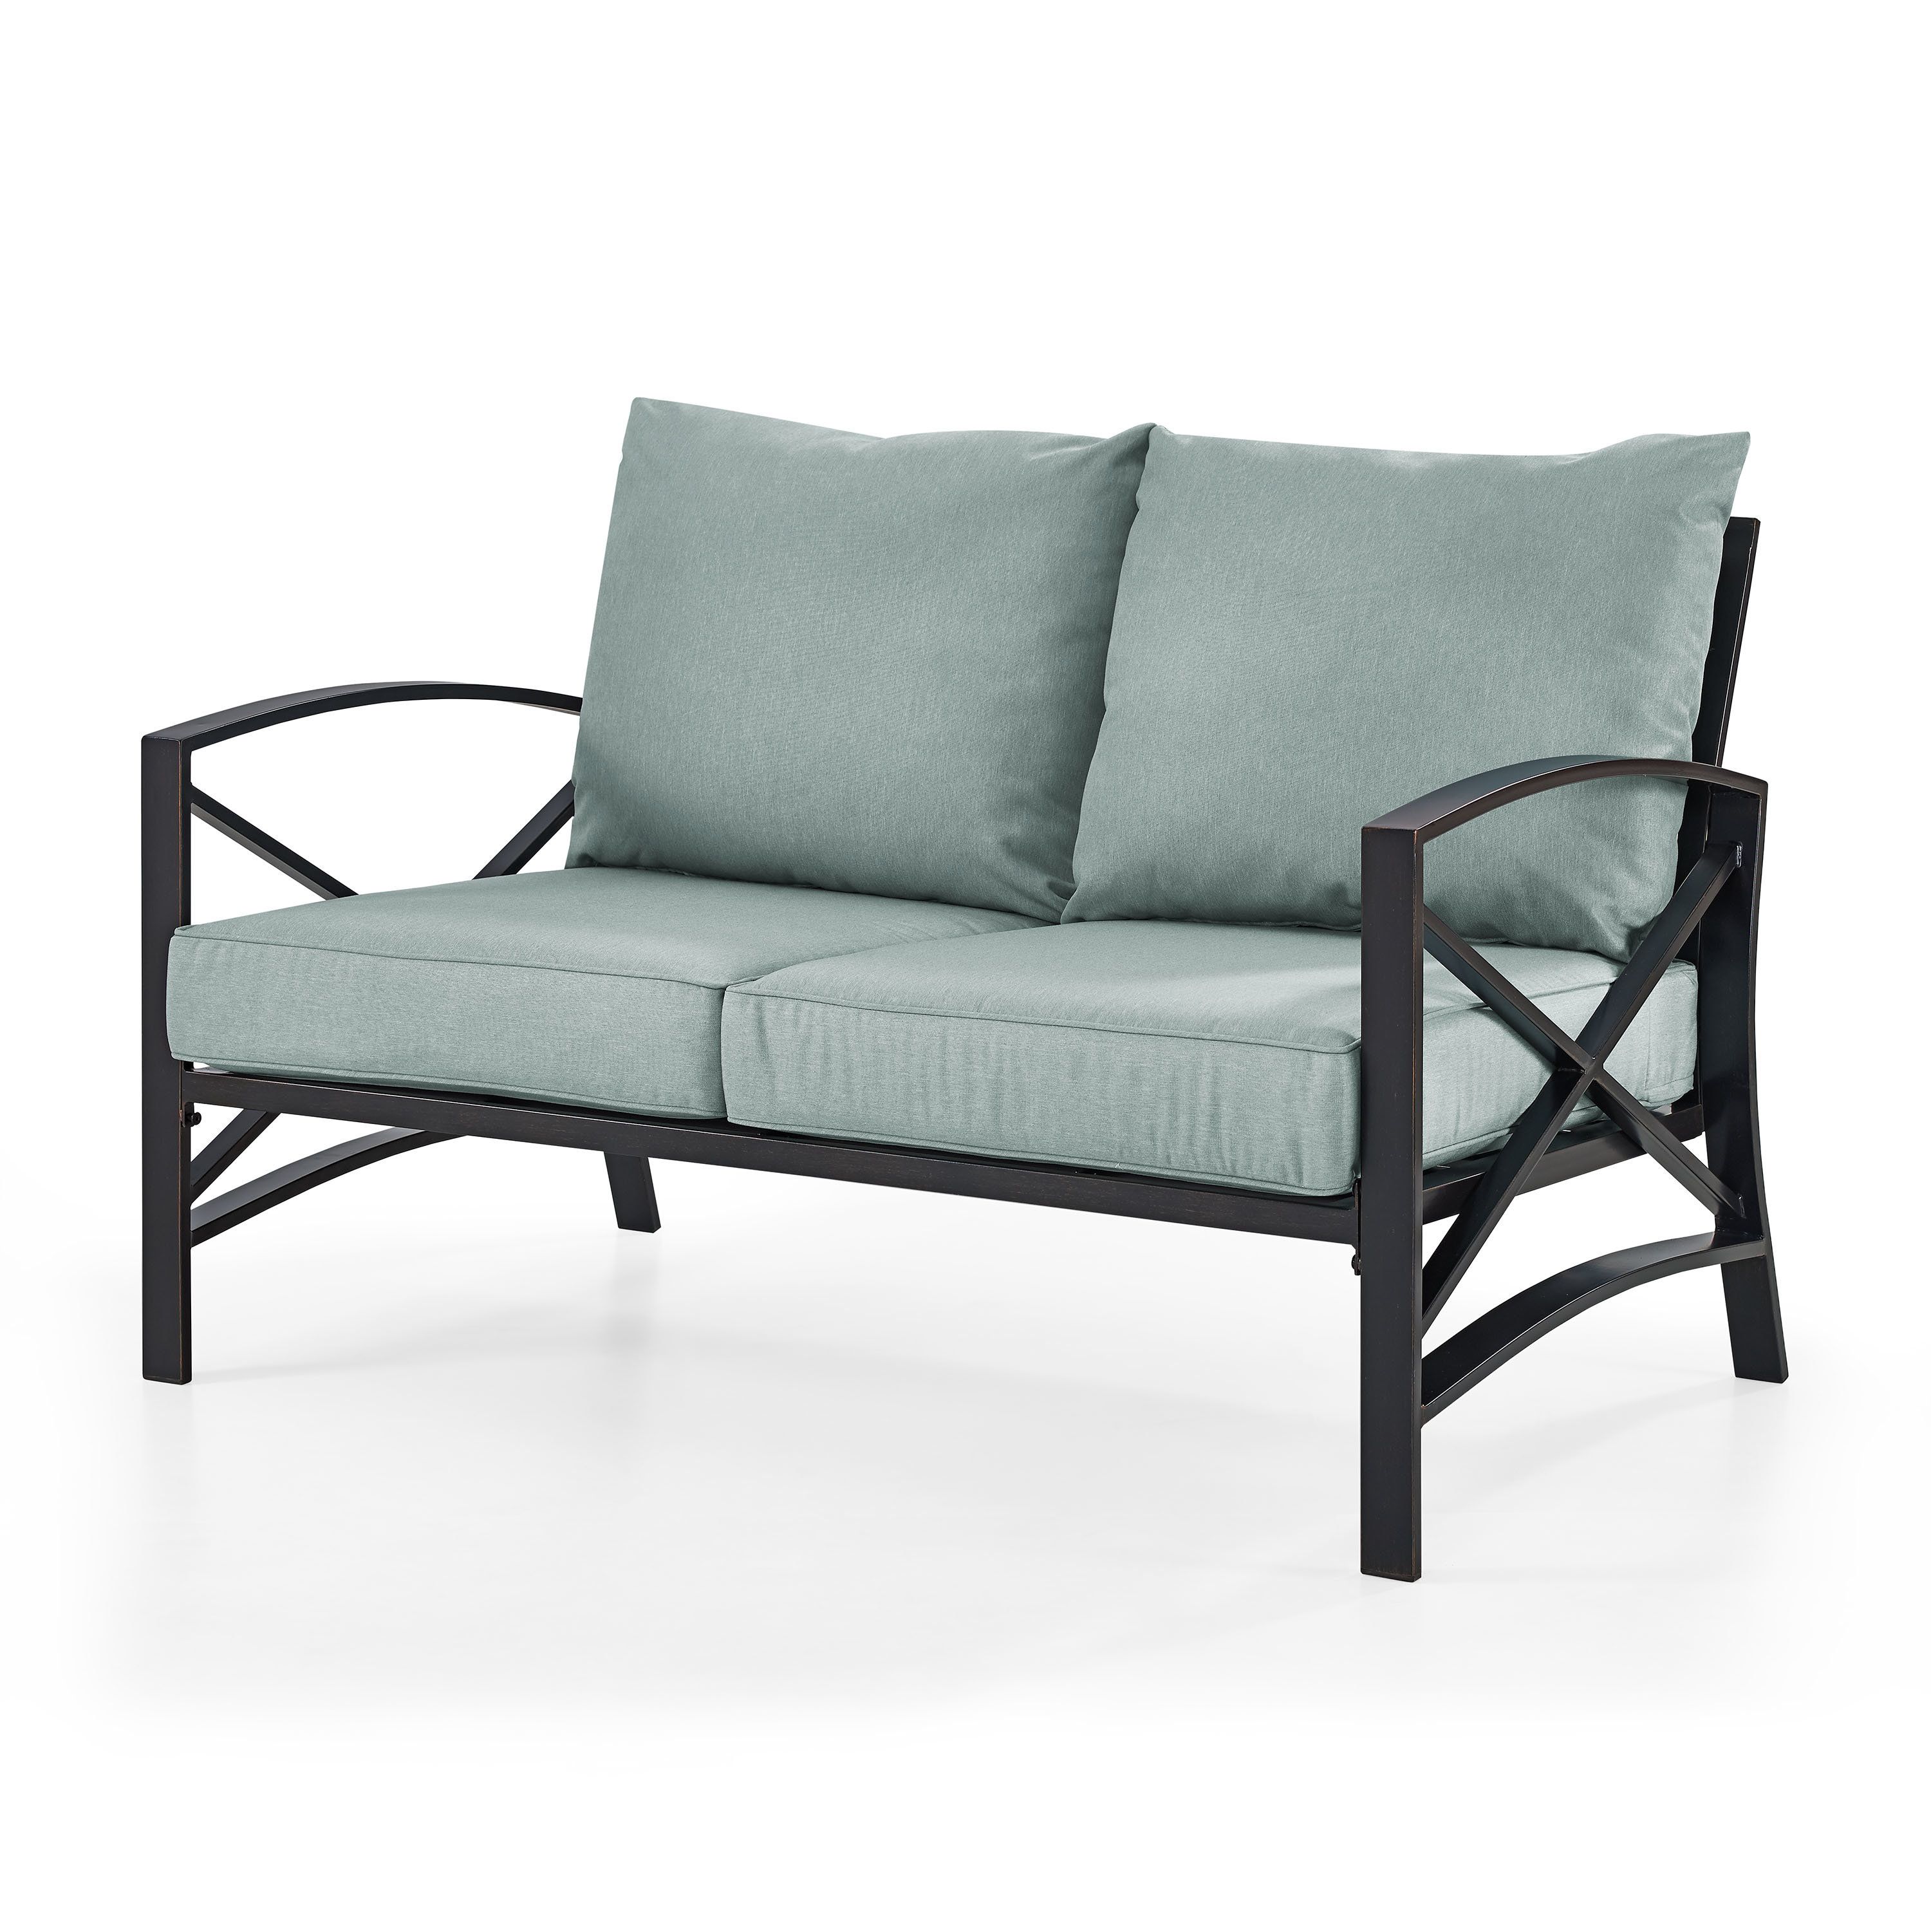 Well Liked Ivy Bronx Freitag Loveseat With Cushions Pertaining To Freitag Loveseats With Cushions (Photo 6 of 20)